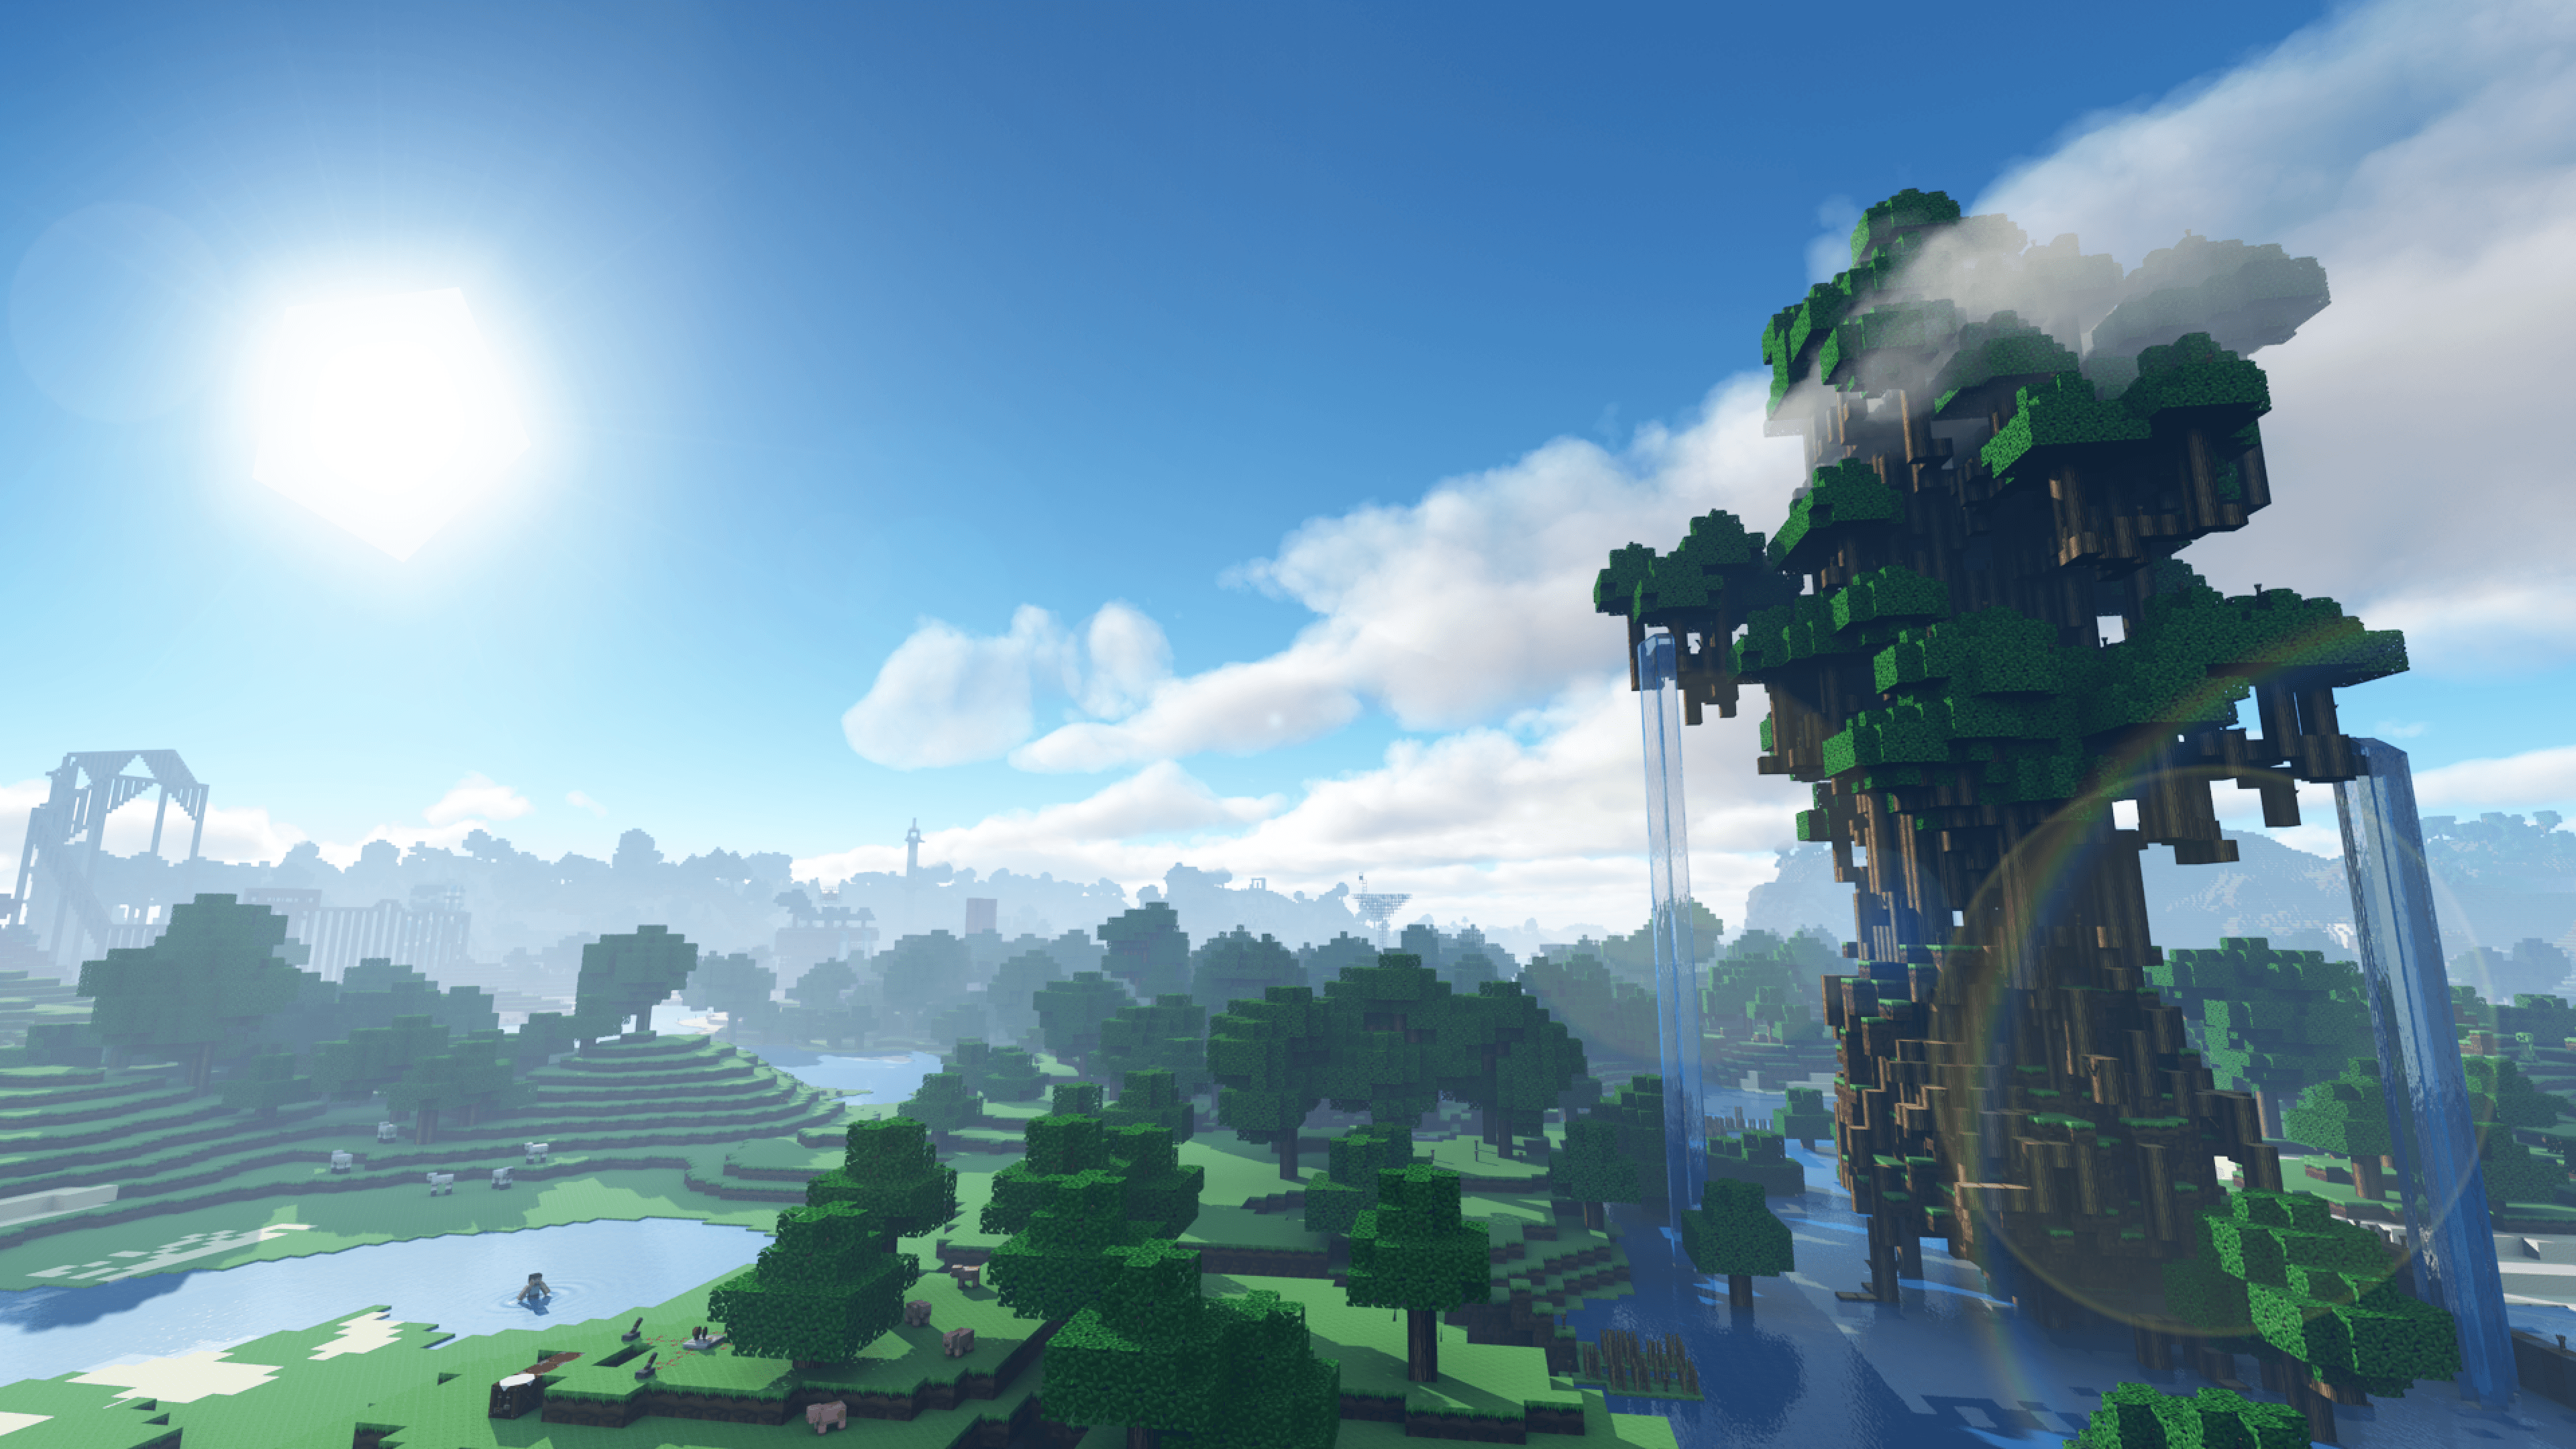 Free download 4K Minecraft Wallpapers Top 4K Minecraft Backgrounds